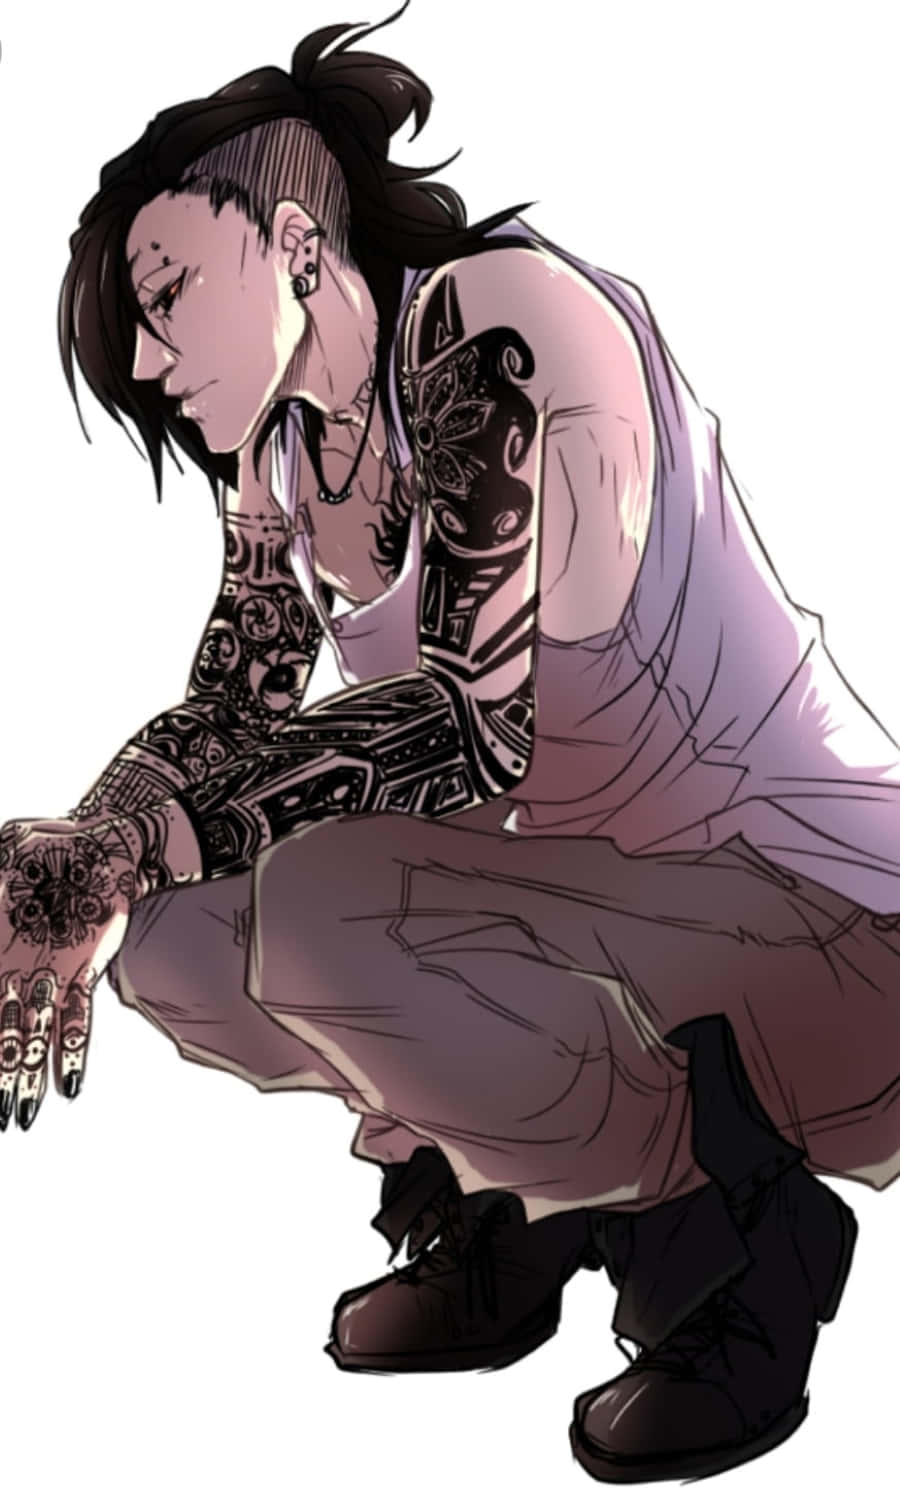 Mysterious and Intriguing Tokyo Ghoul Uta Wallpaper